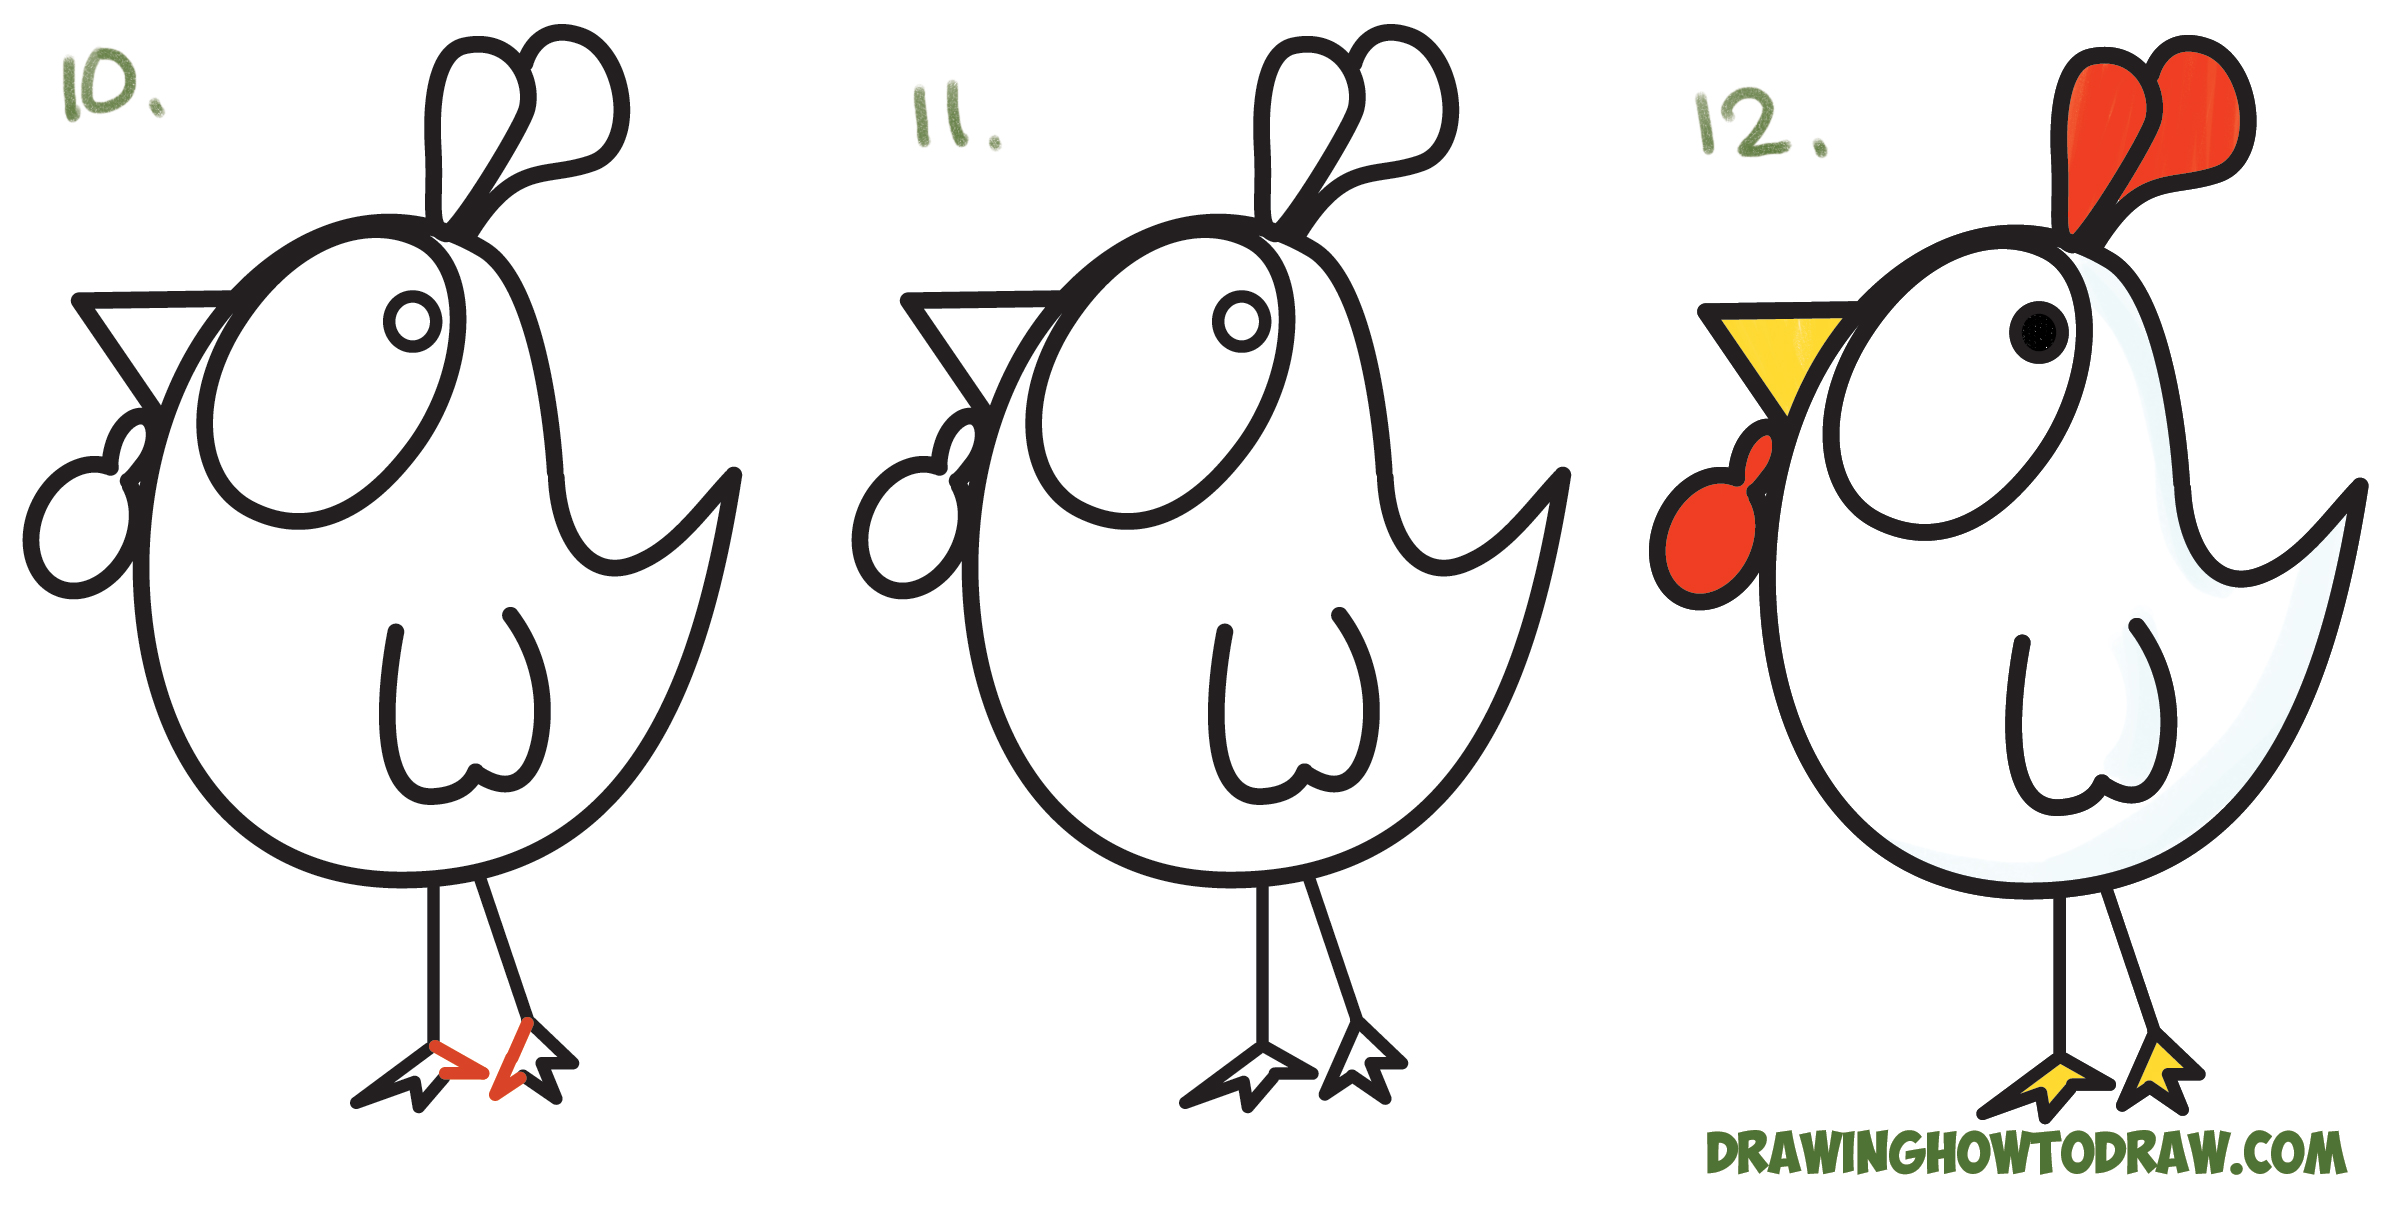 How to Draw a Cartoon Chicken / Rooster from ? and ! Shapes - Easy Step